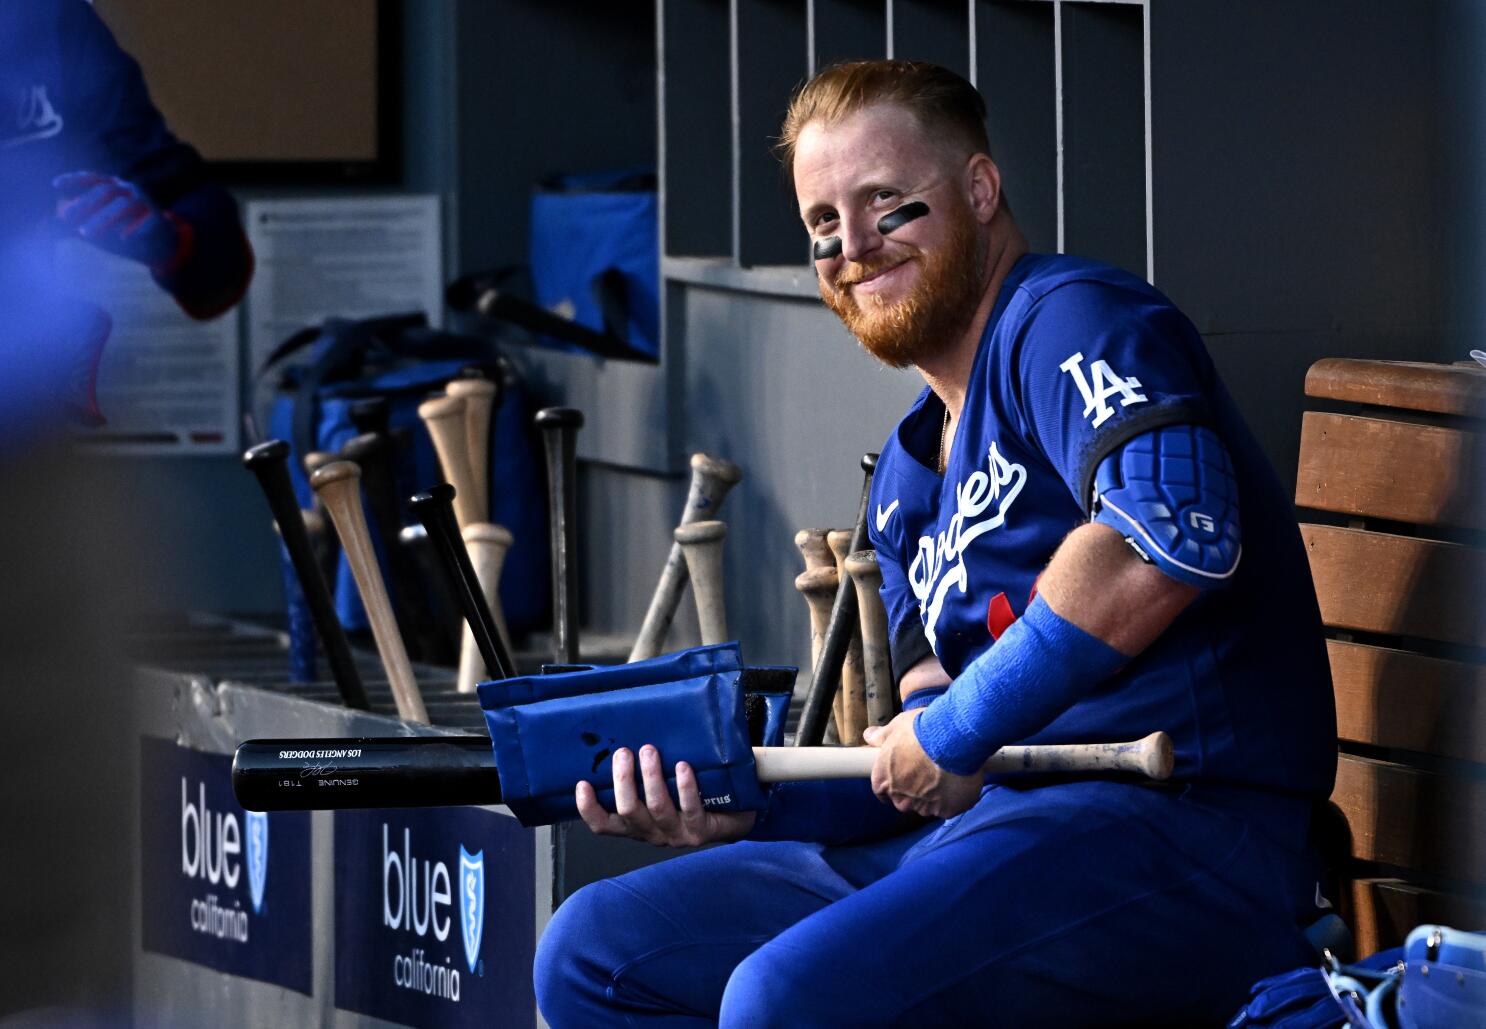 Plaschke: Justin Turner's act of selfishness leaves stain on Dodgers'  championship moment - Los Angeles Times